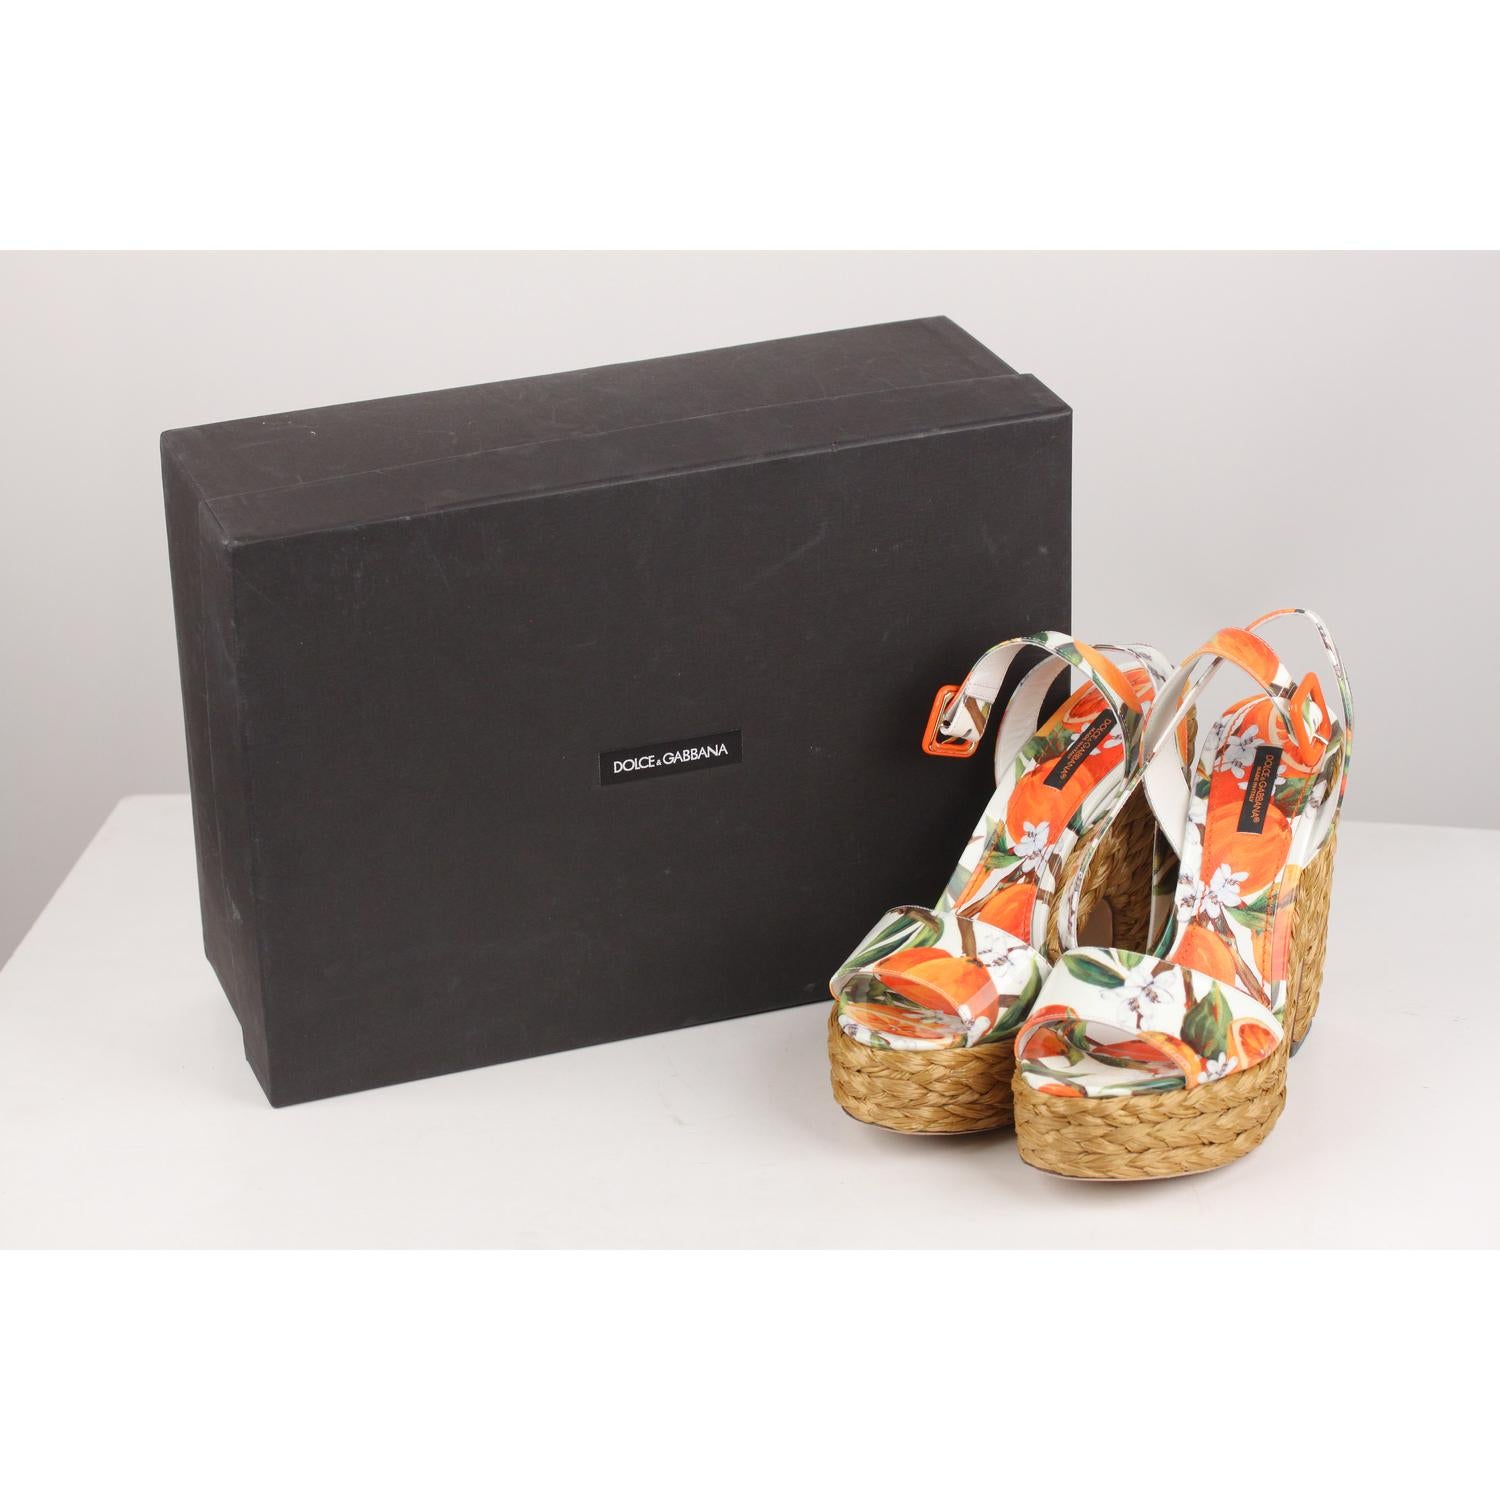 - Dolce & Gabbana Patent leather platform sandals with orange fuits and flowers print
- Woven straw platforms
- Open toe
- Buckle-fastening ankle strap
- Size: 38
- Heels height: 5.5 inches - 14 cm